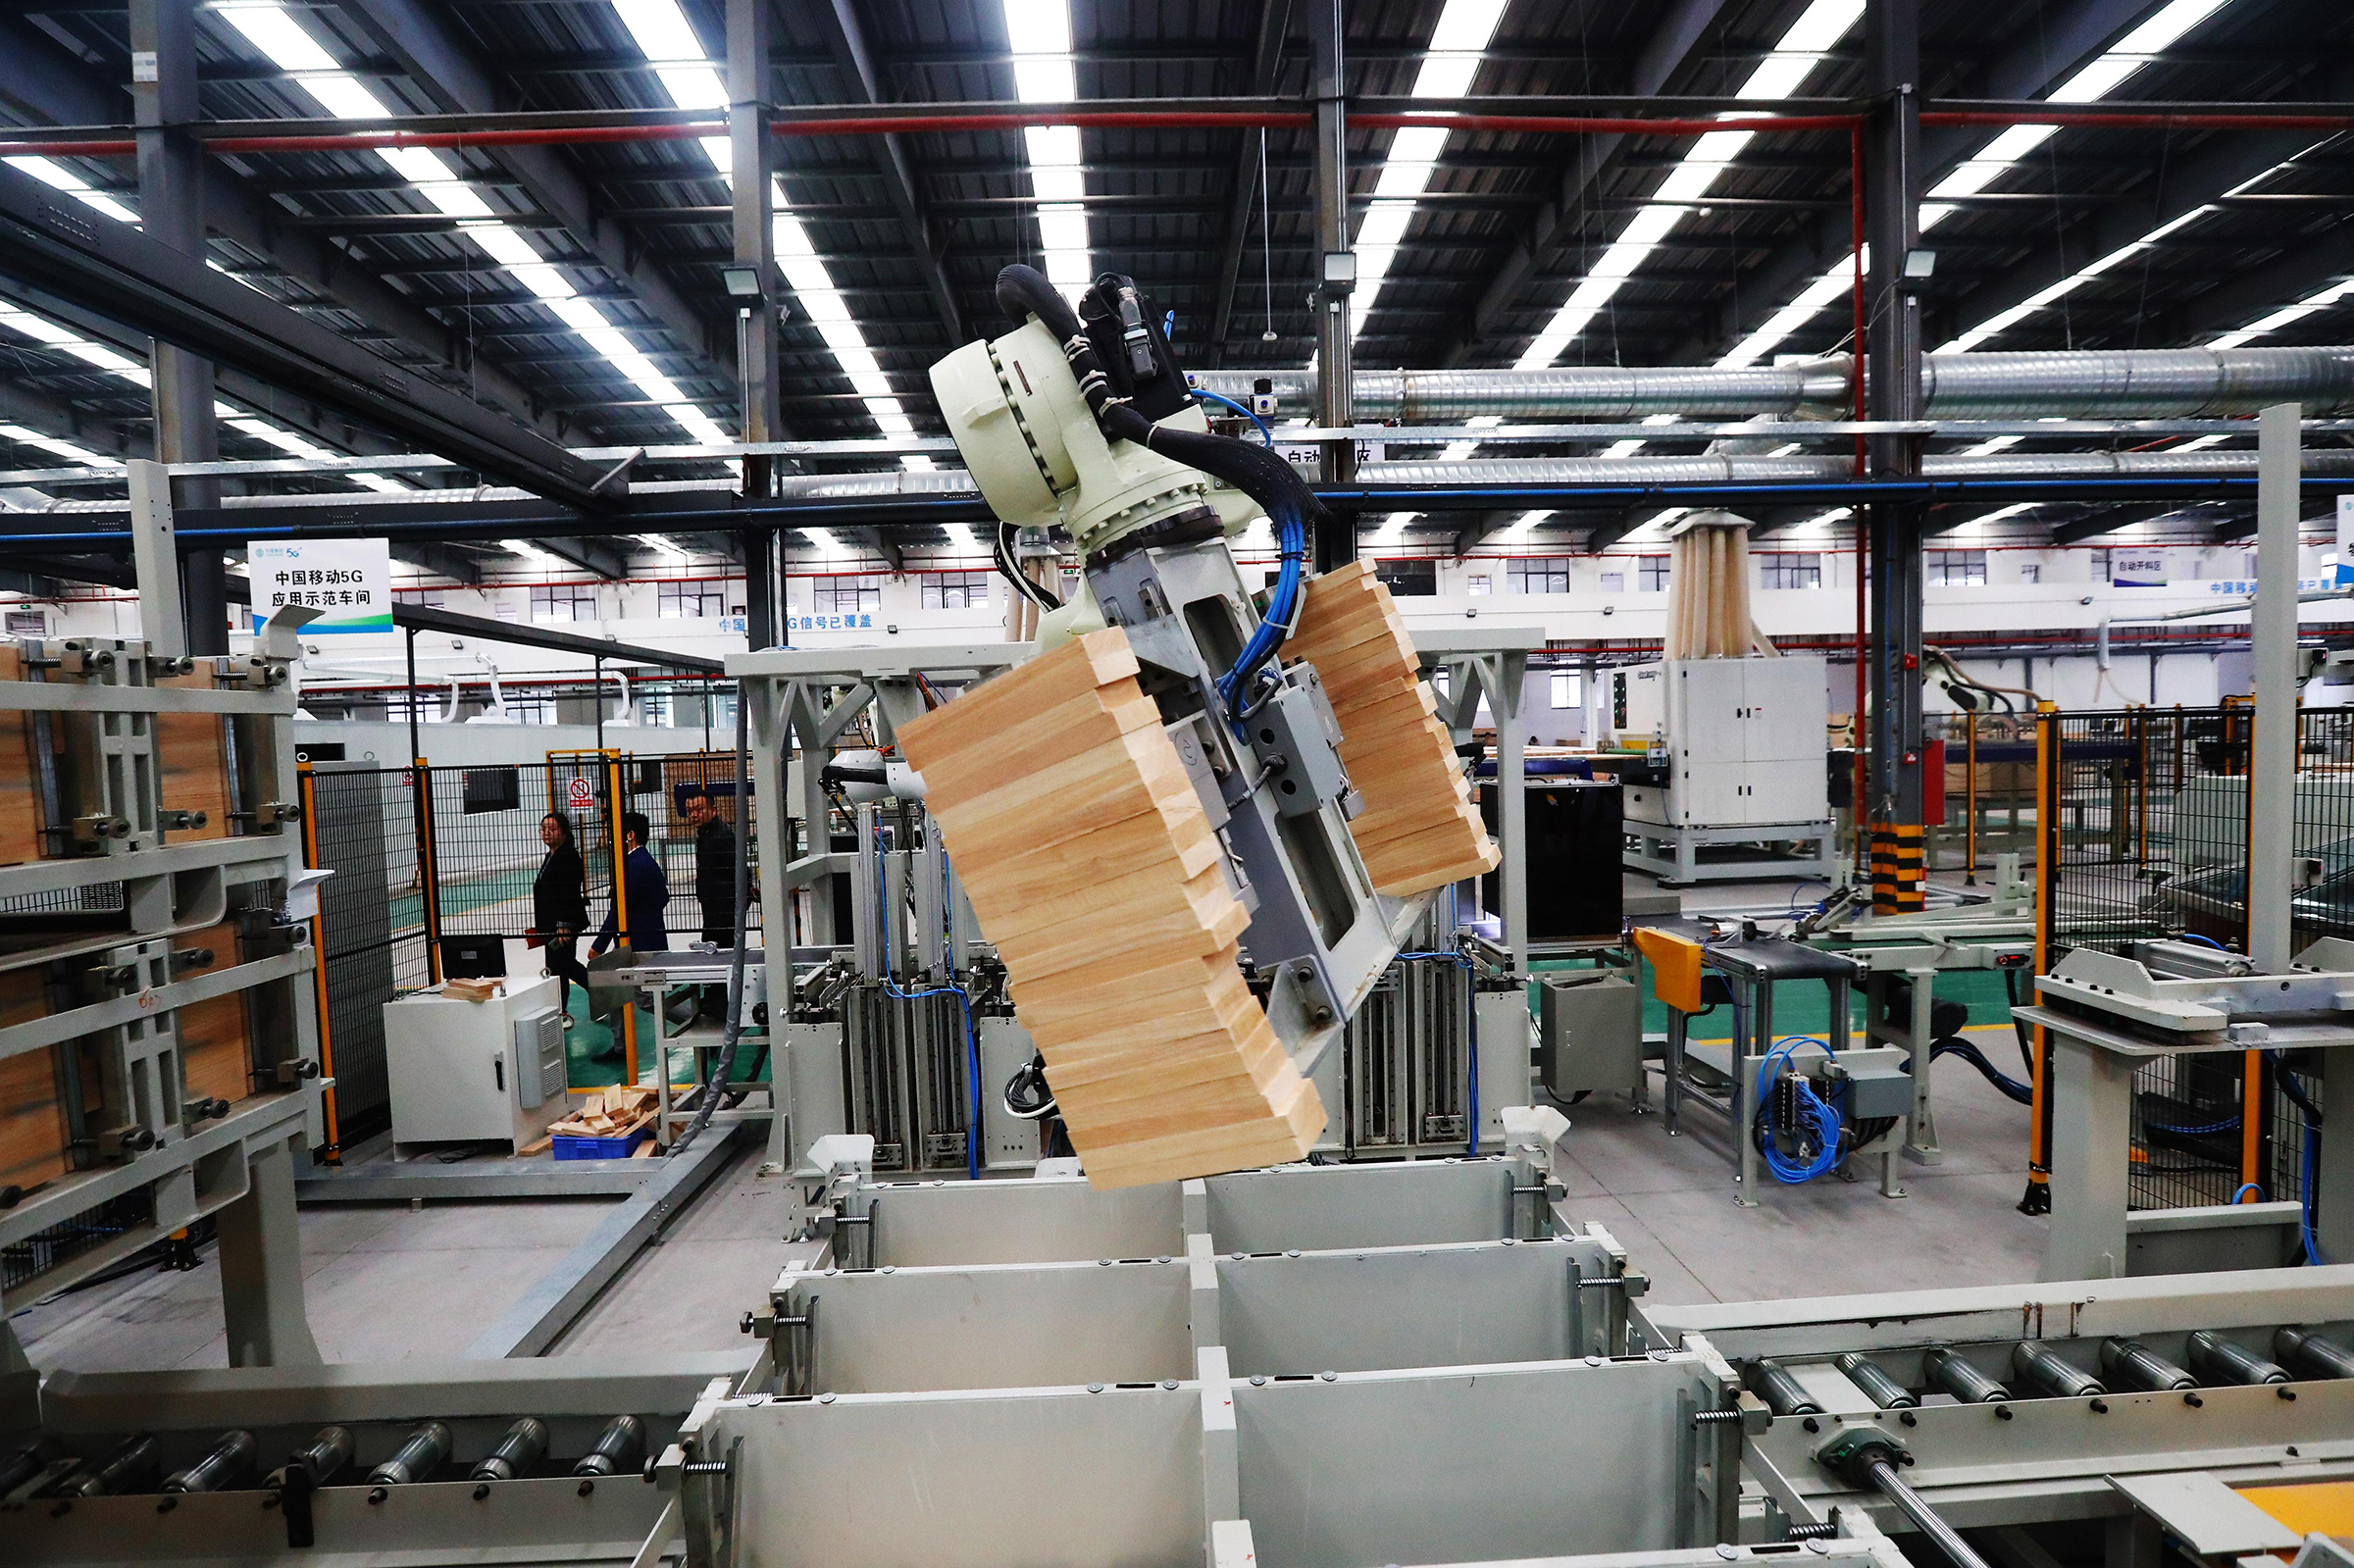 A robotic arm moves bricks using 5G and AI on Oct. 21 in Ganzhou, Jiangxi province